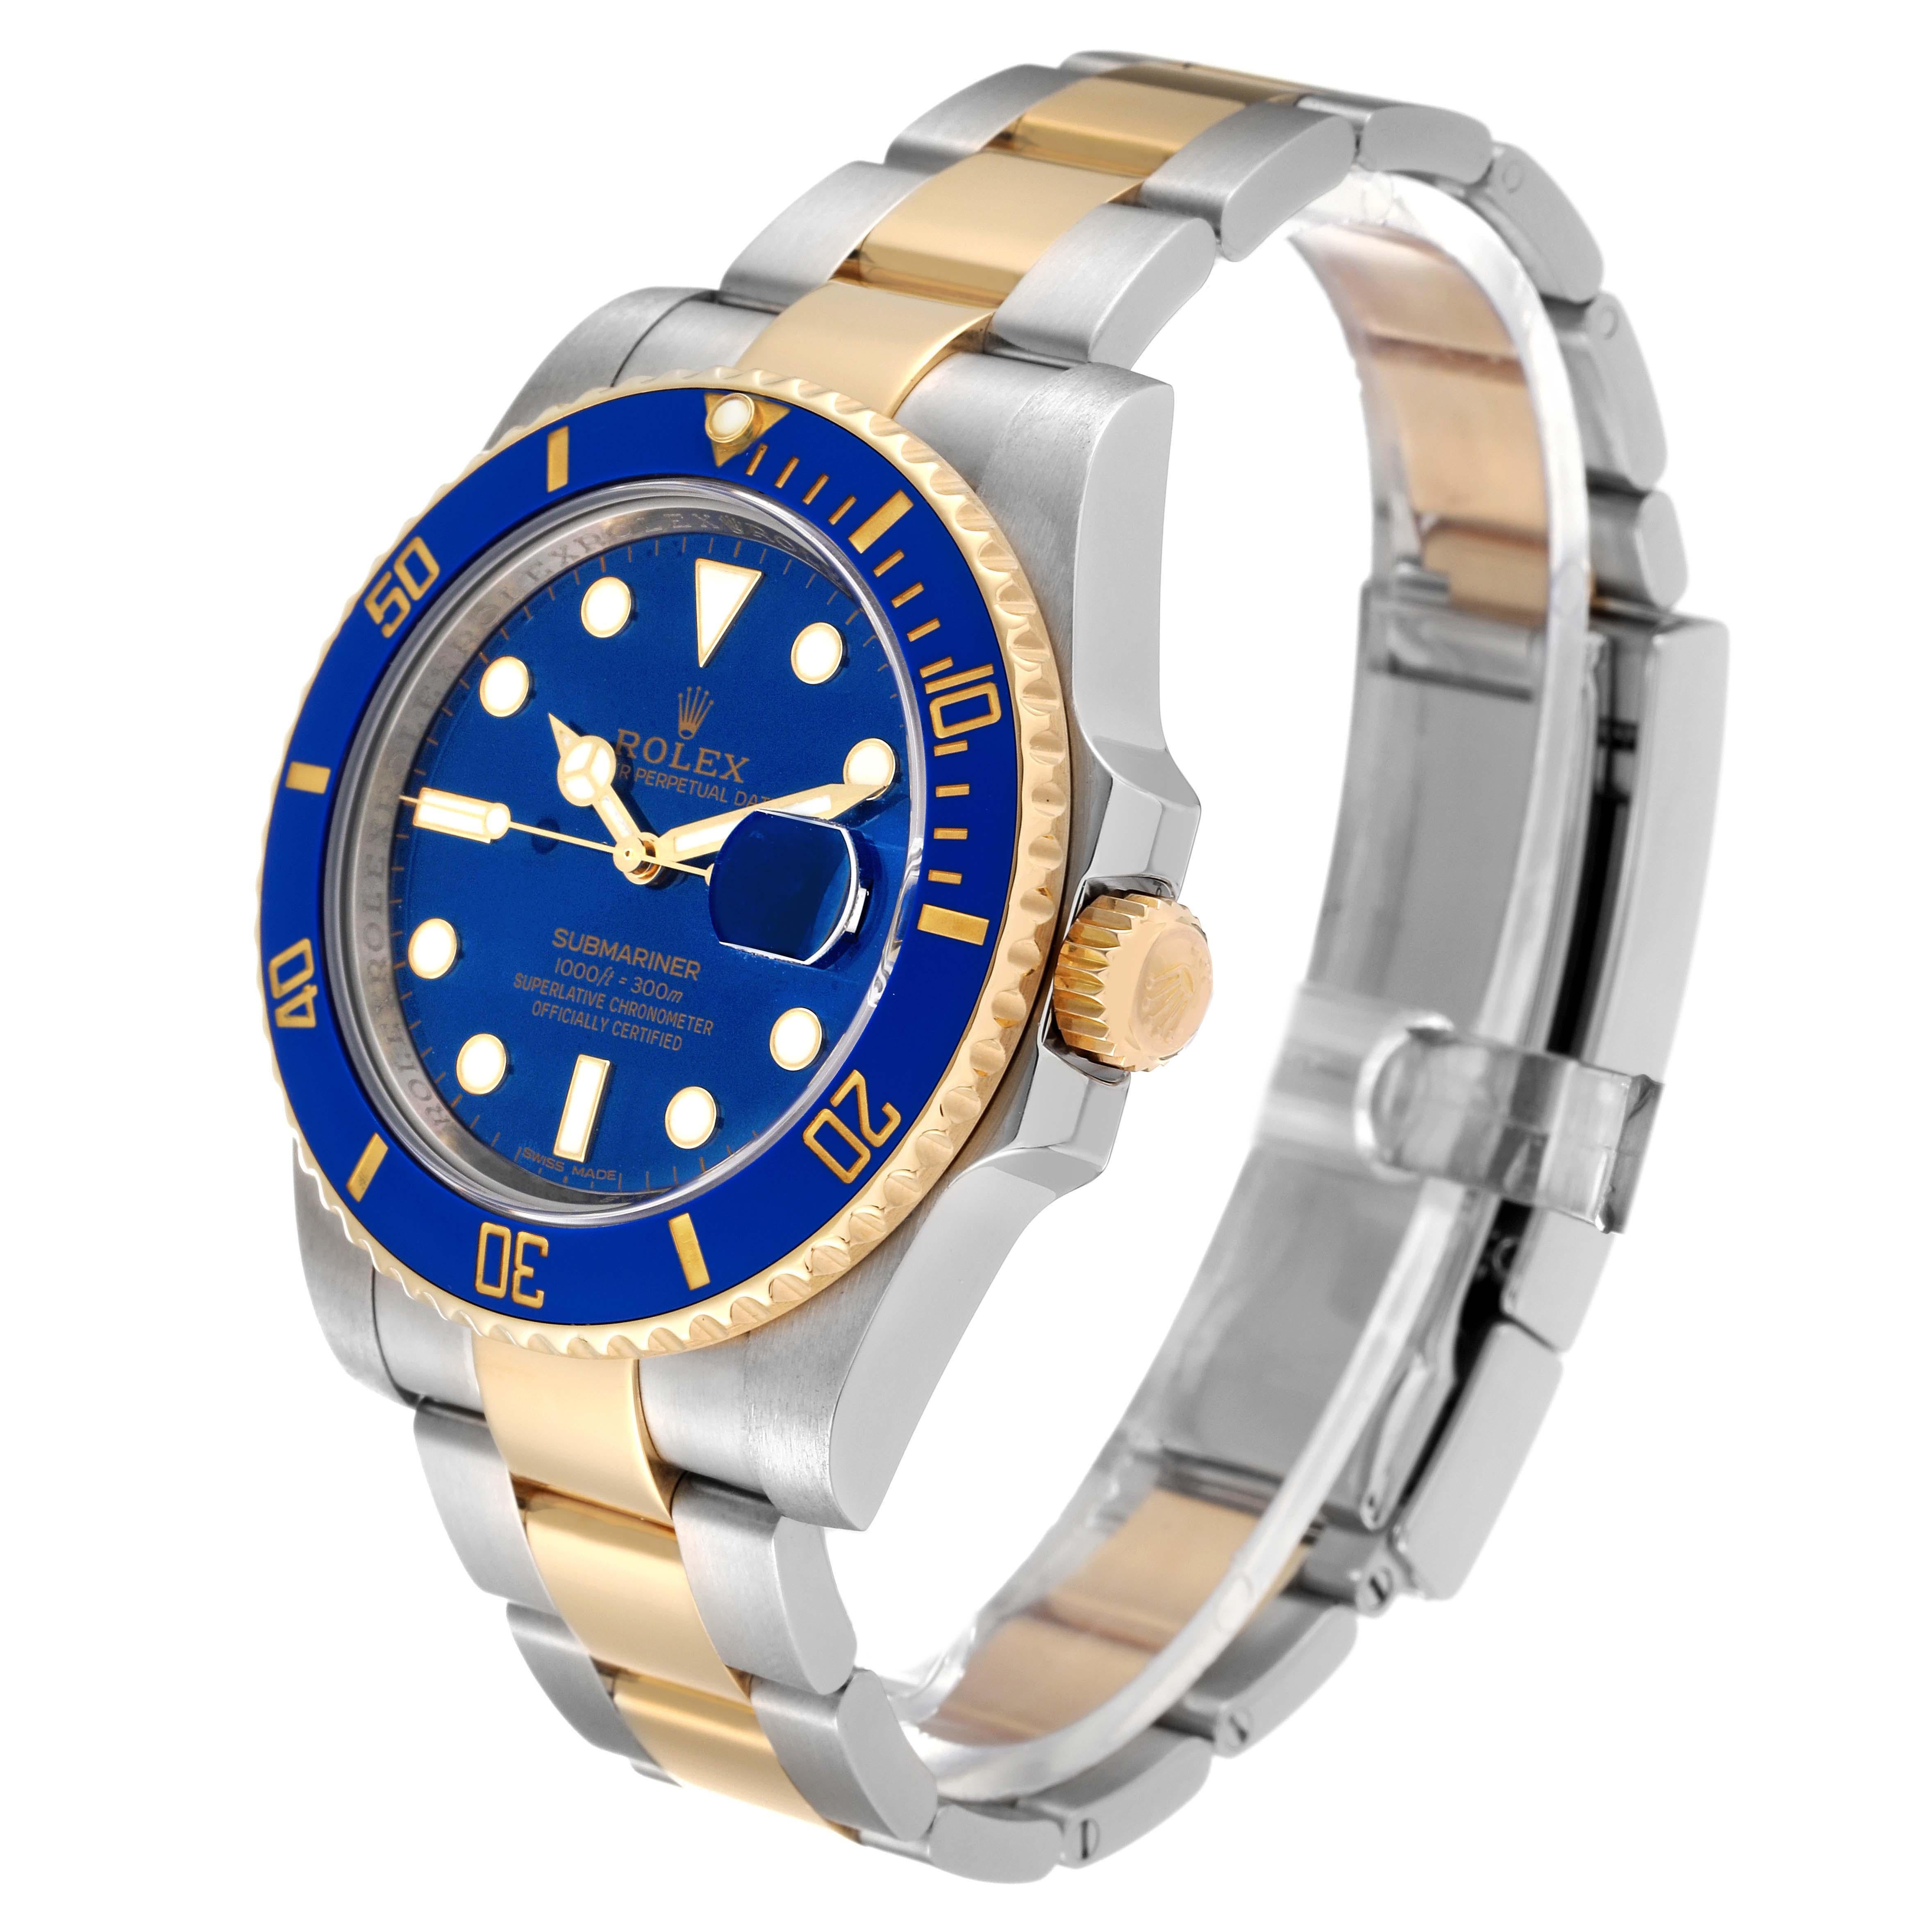 Men's Rolex Submariner Steel Yellow Gold Blue Dial Mens Watch 116613 For Sale